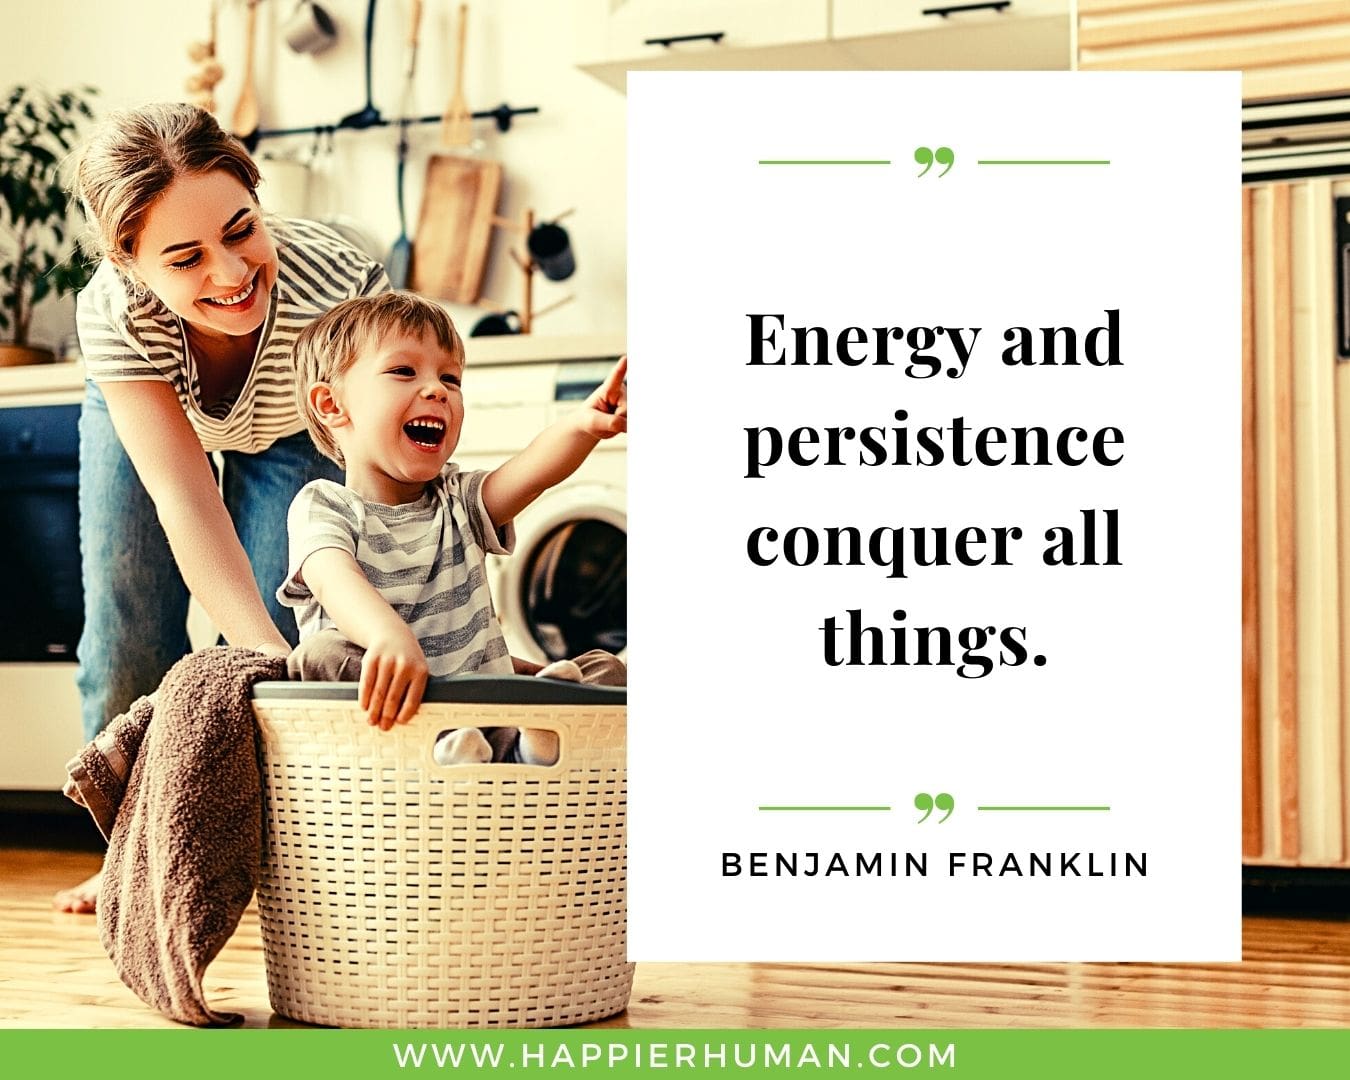 Positive Energy Quotes - “Energy and persistence conquer all things.” - Benjamin Franklin